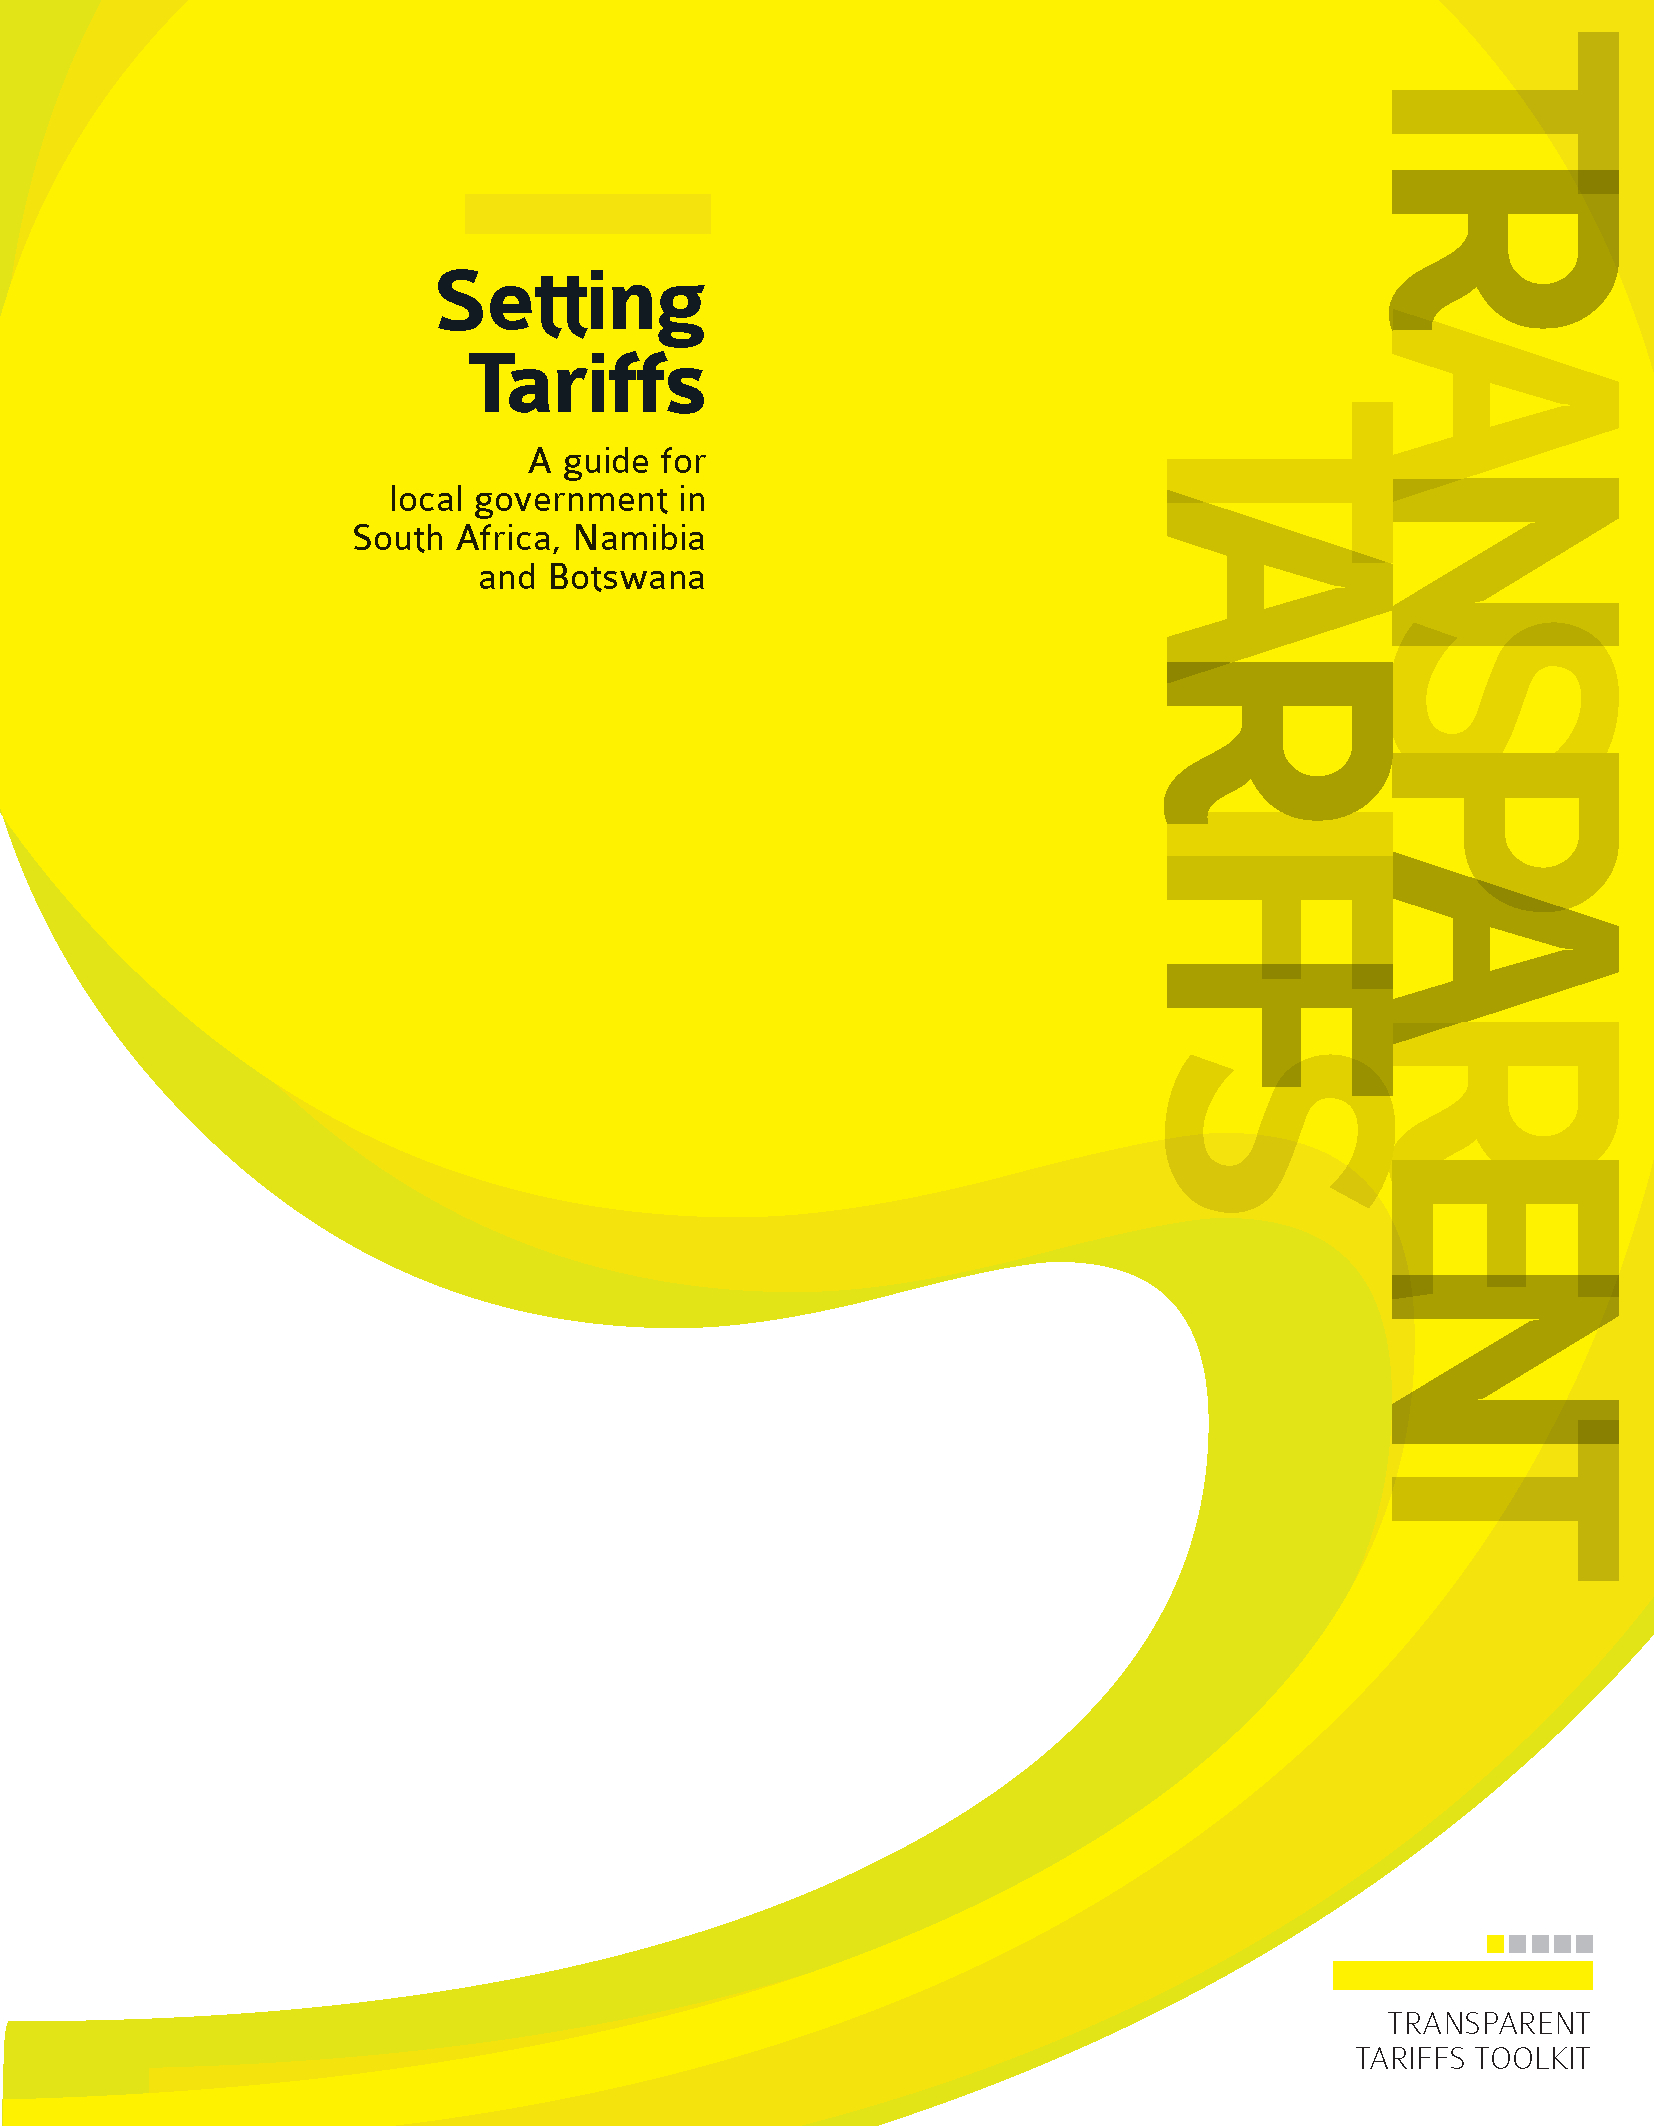 Cover page for Setting Tariffs: A guide for local government in South Africa, Namibia, and Botswana